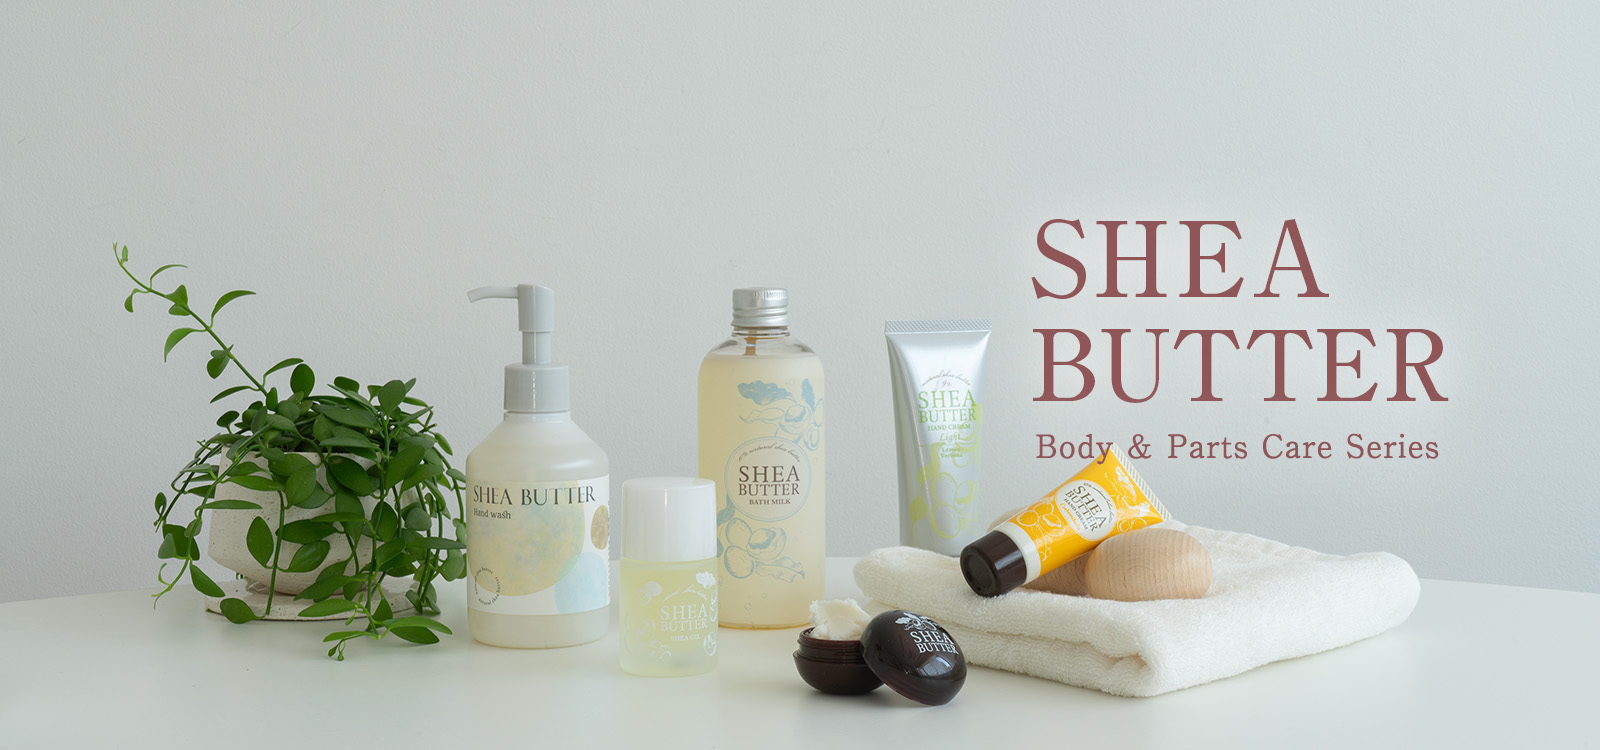 SHEA BUTTER Body & Parts Care Series